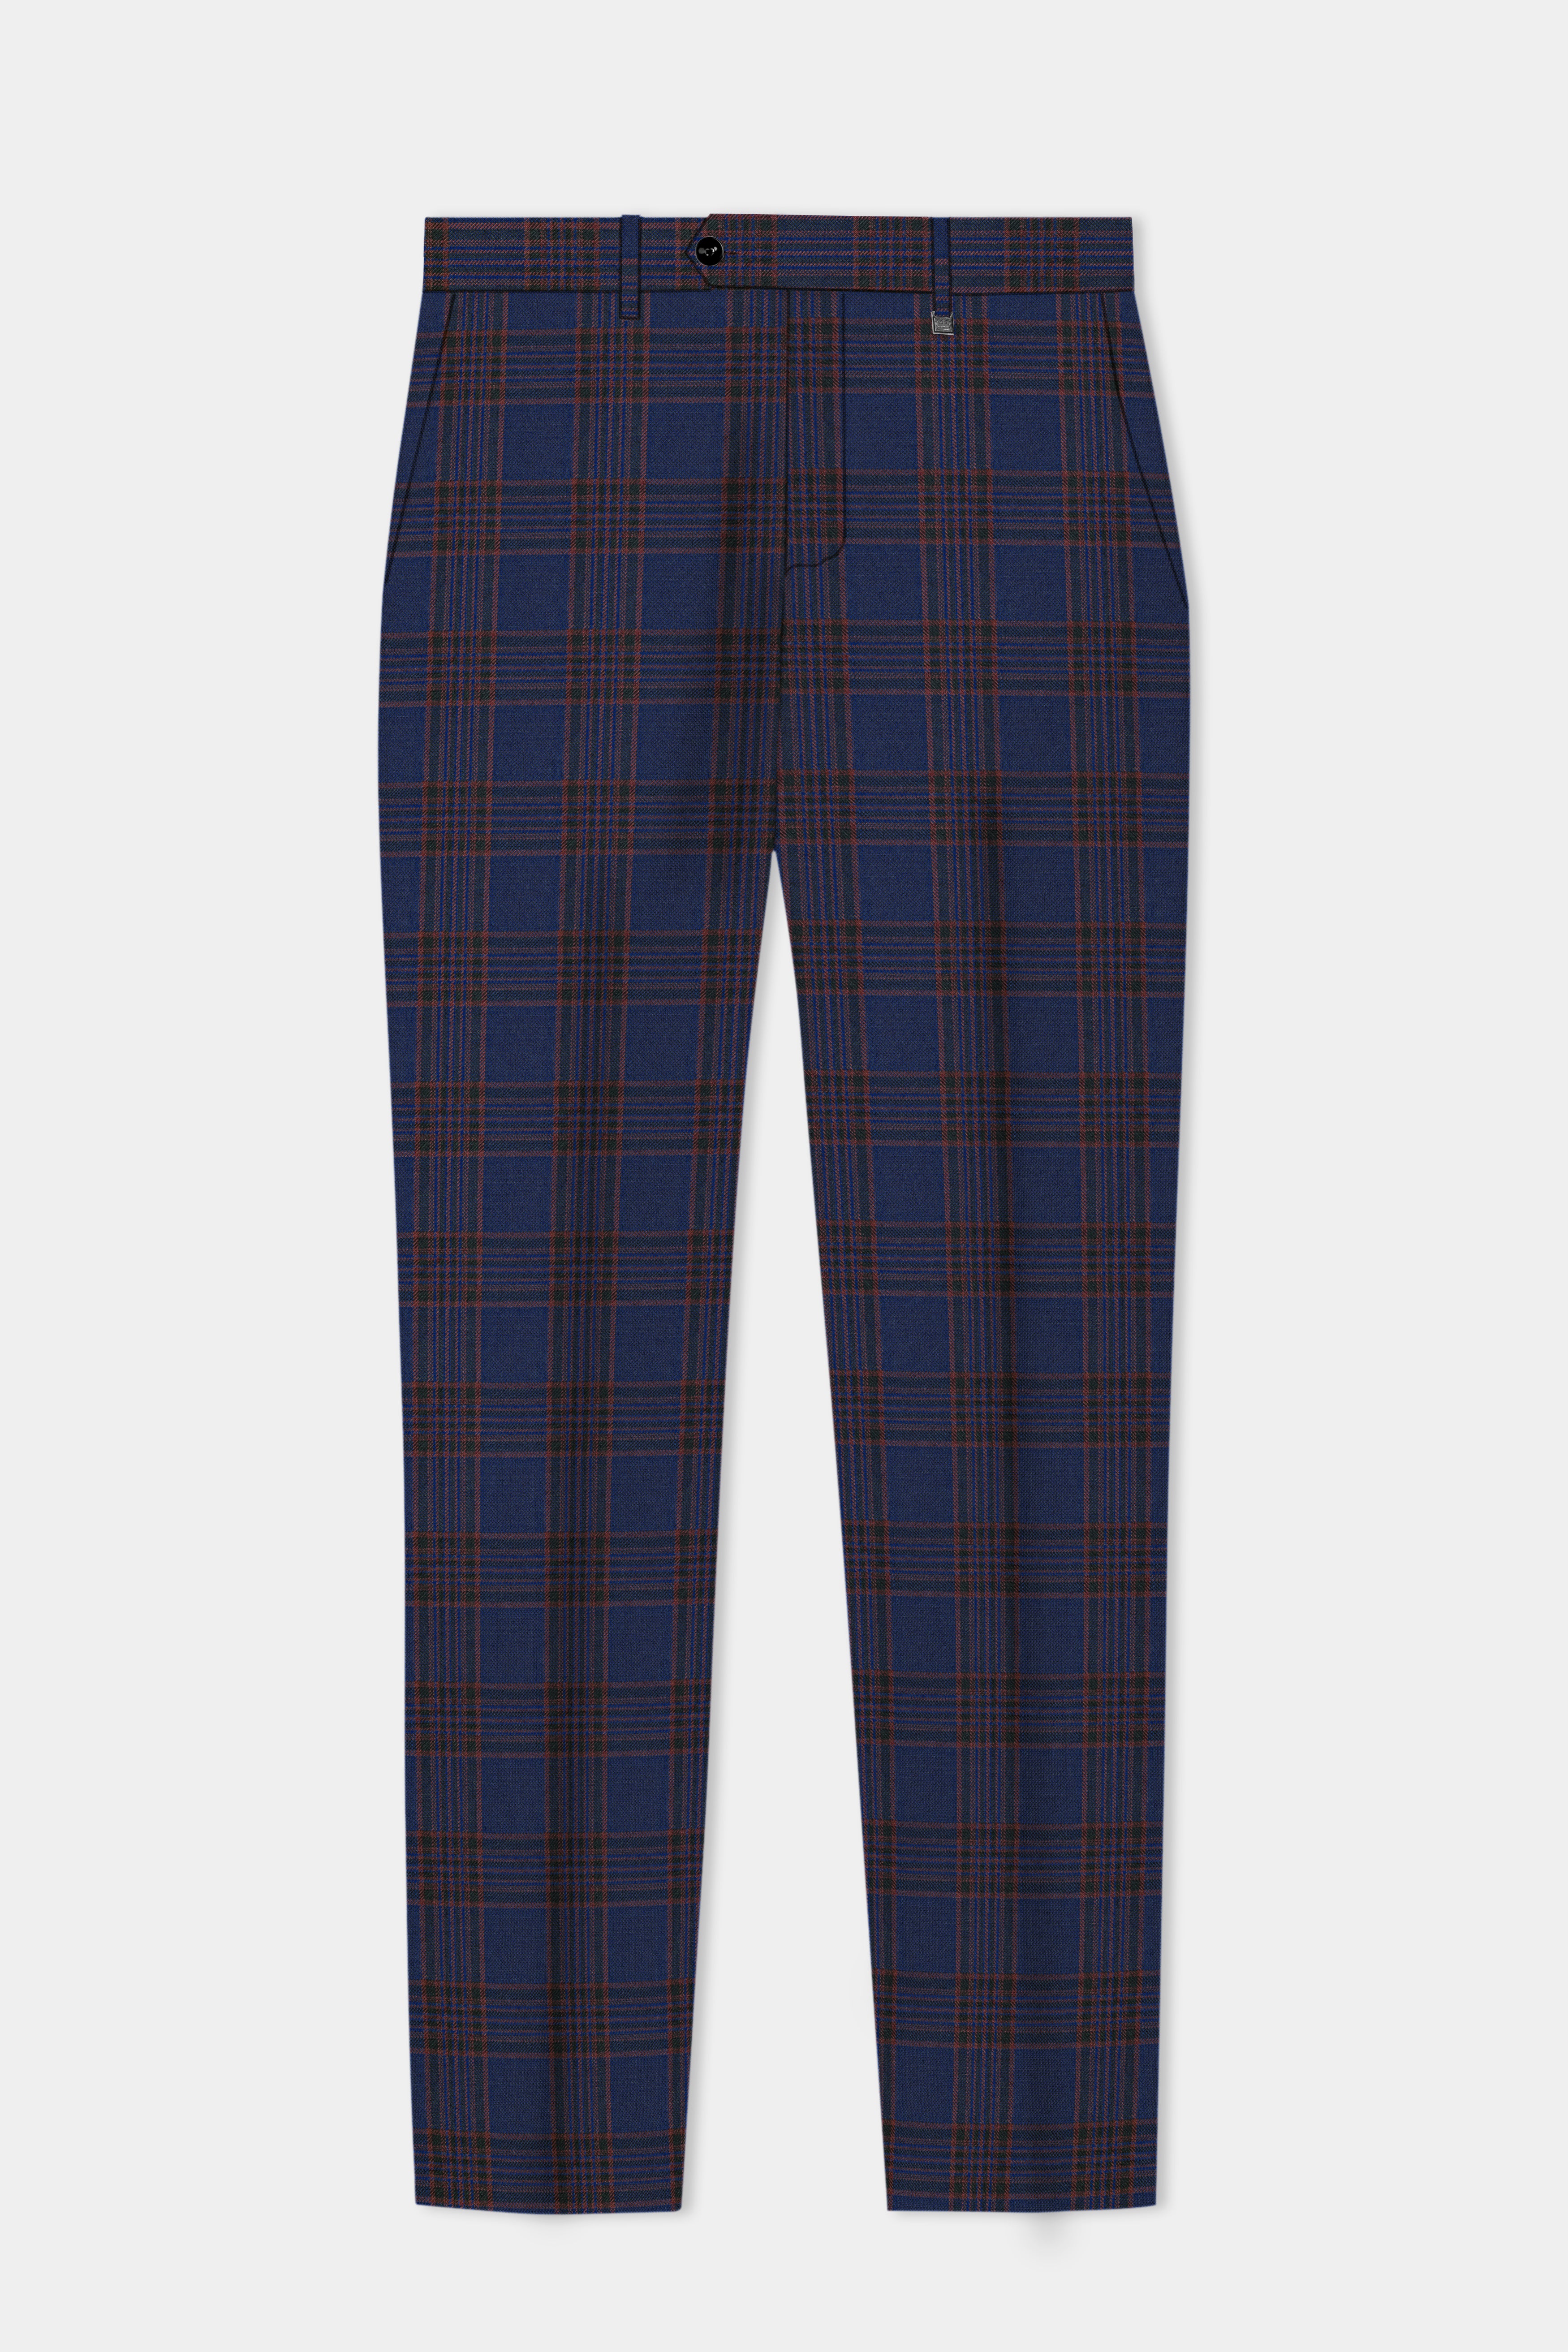 Bunting Blue with Livid Brown Plaid Wool Blend Pant